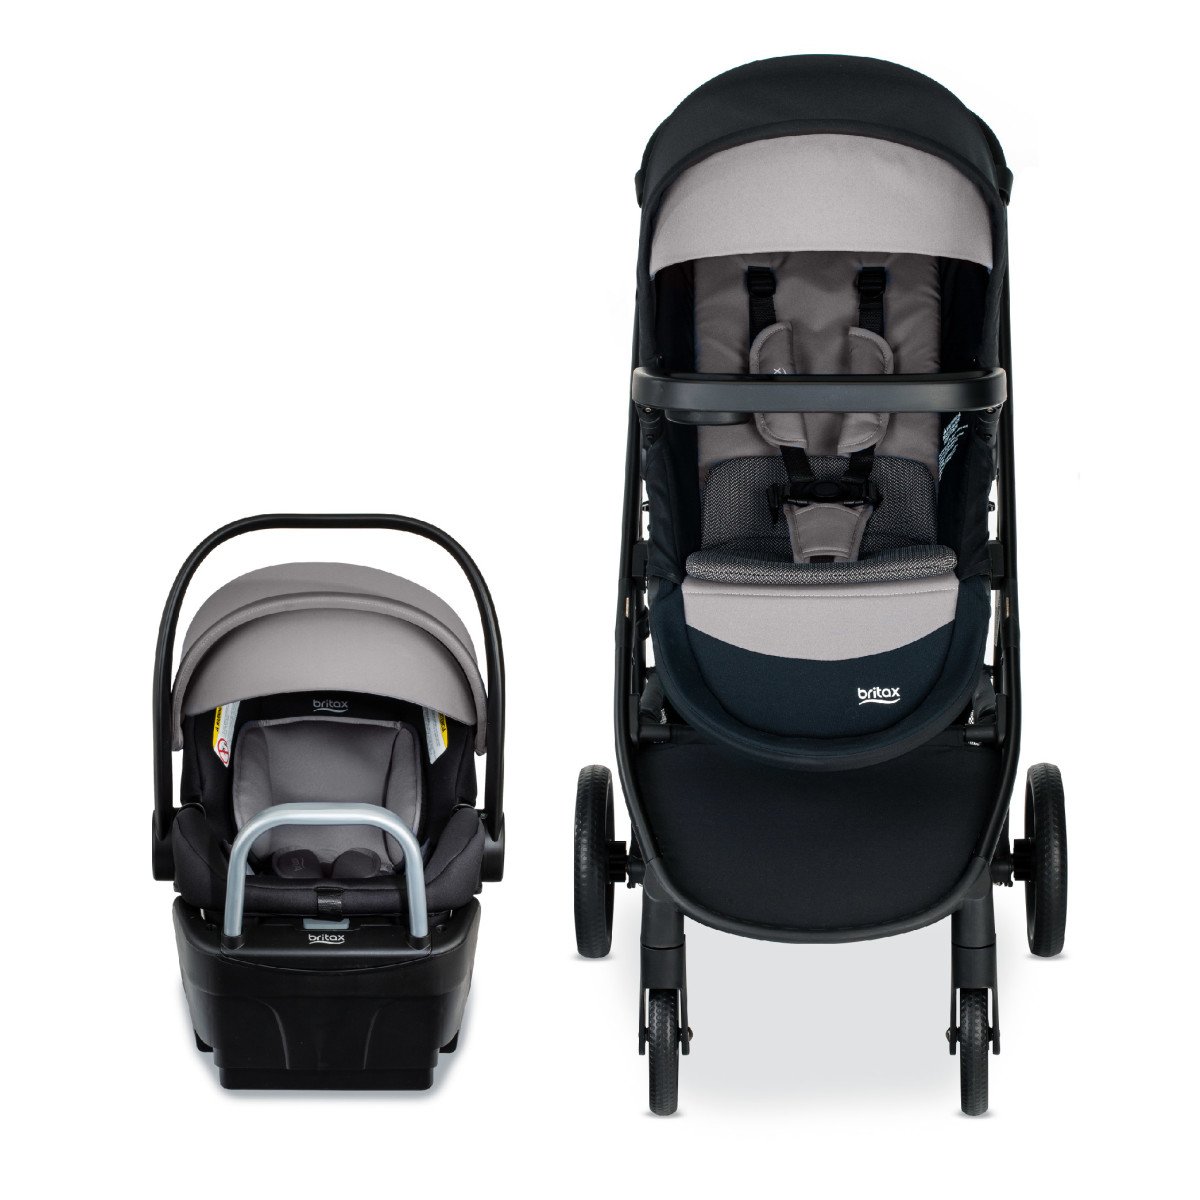 Center facing view of the Willow S Infant Car Seat and Brook+ Stroller (Copy)